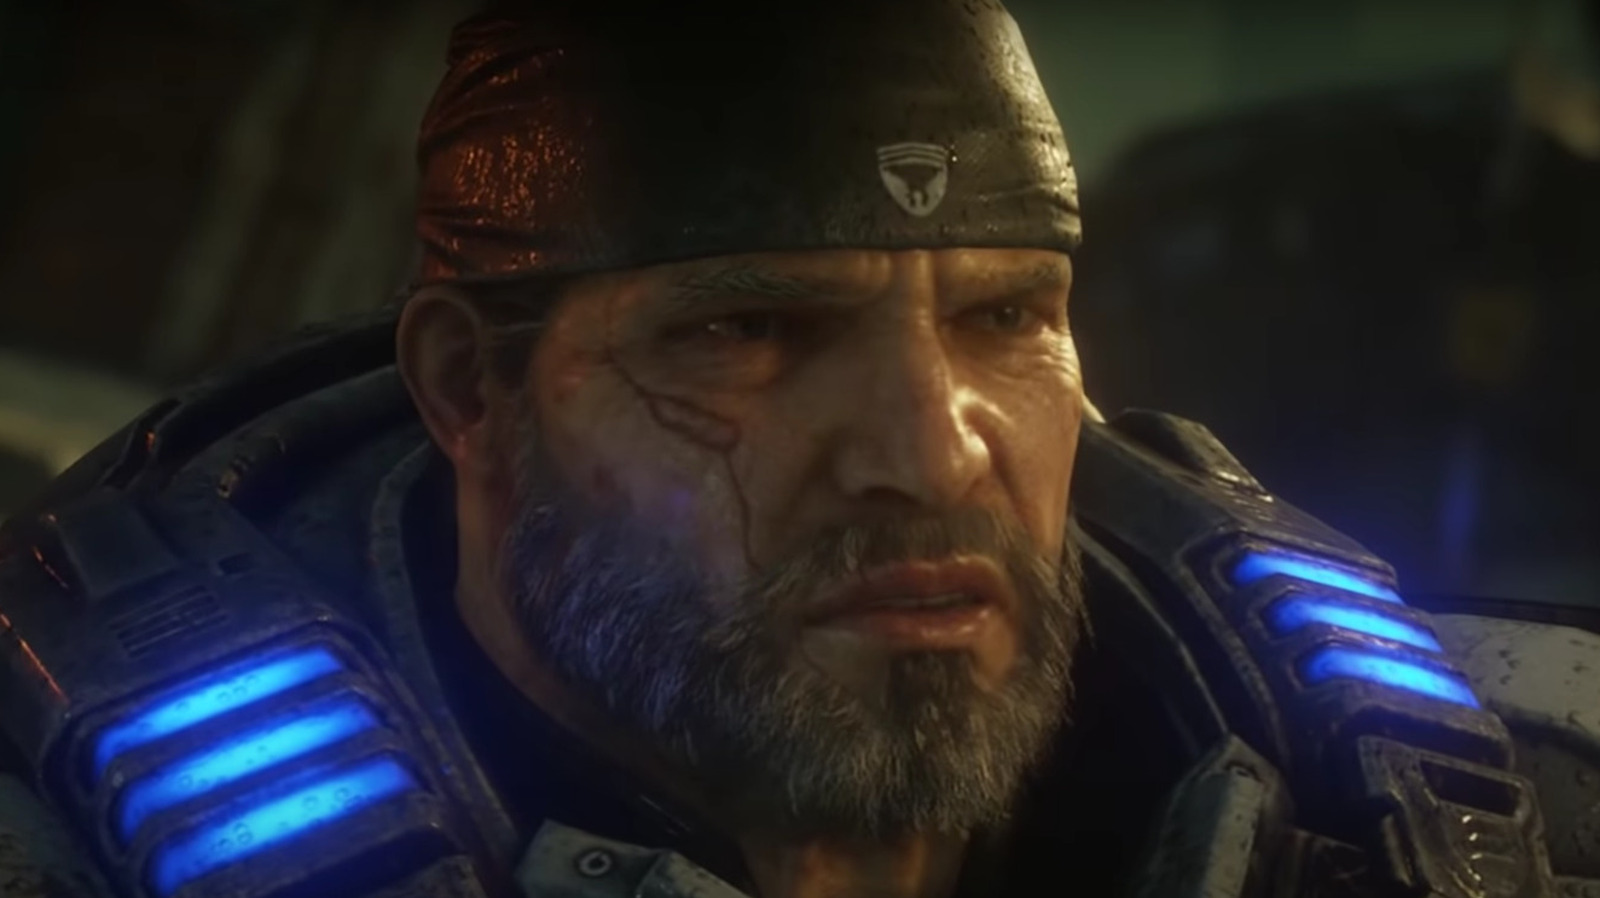 Netflix Adapting 'Gears of War' for Feature Film, Animated Series